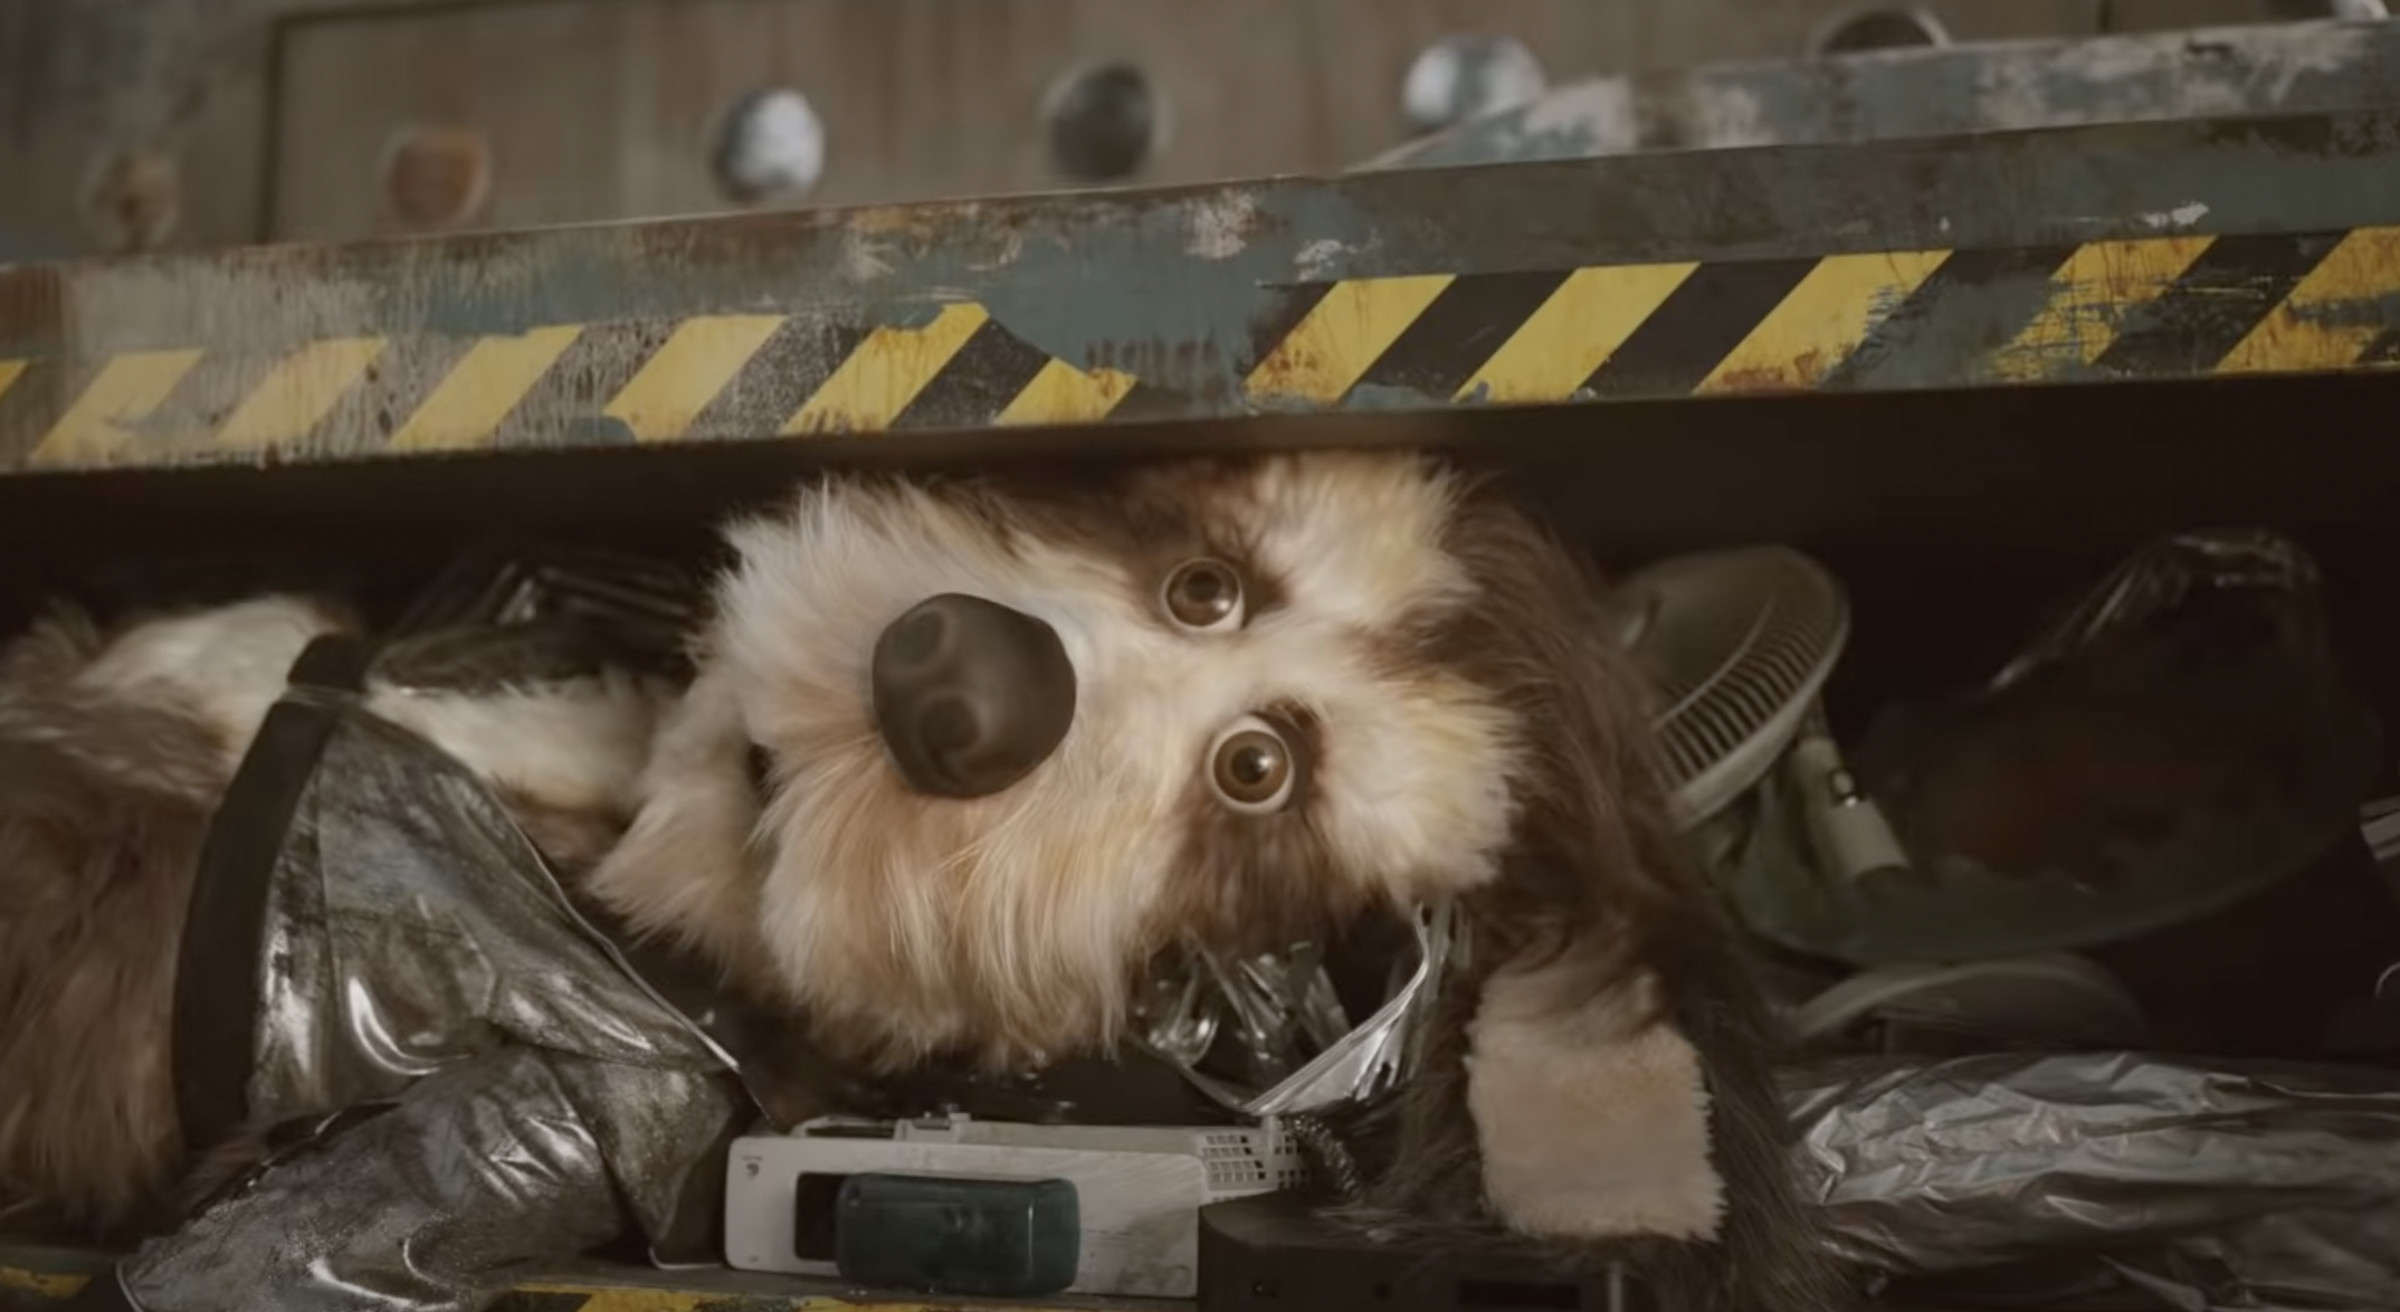 The animatronic dog lays helplessly in a trash compactor.